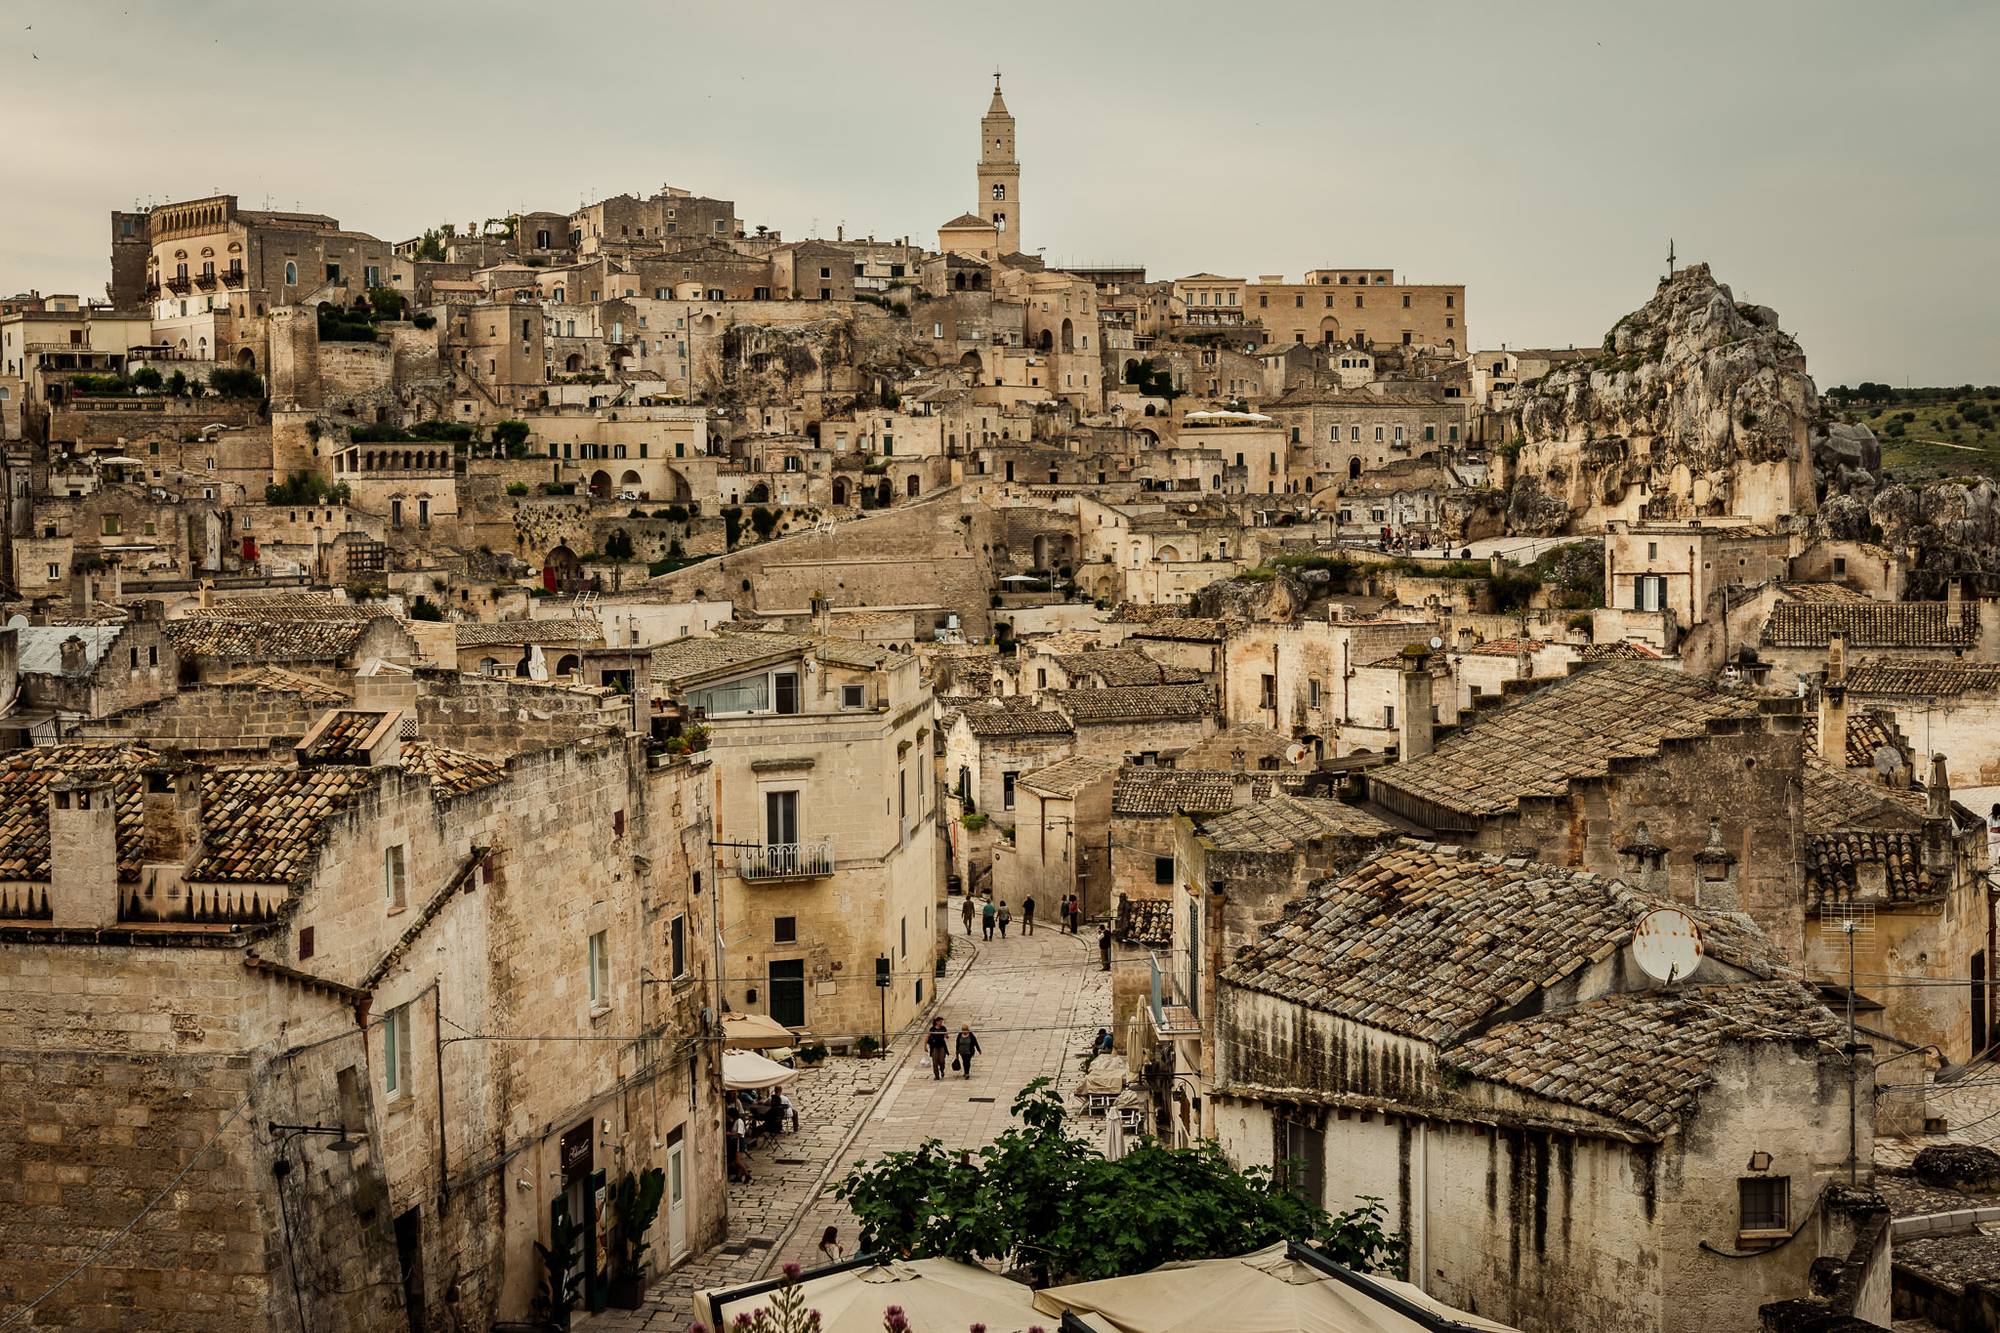 It feels like stepping back in time in Matera’s Sasso Caveoso